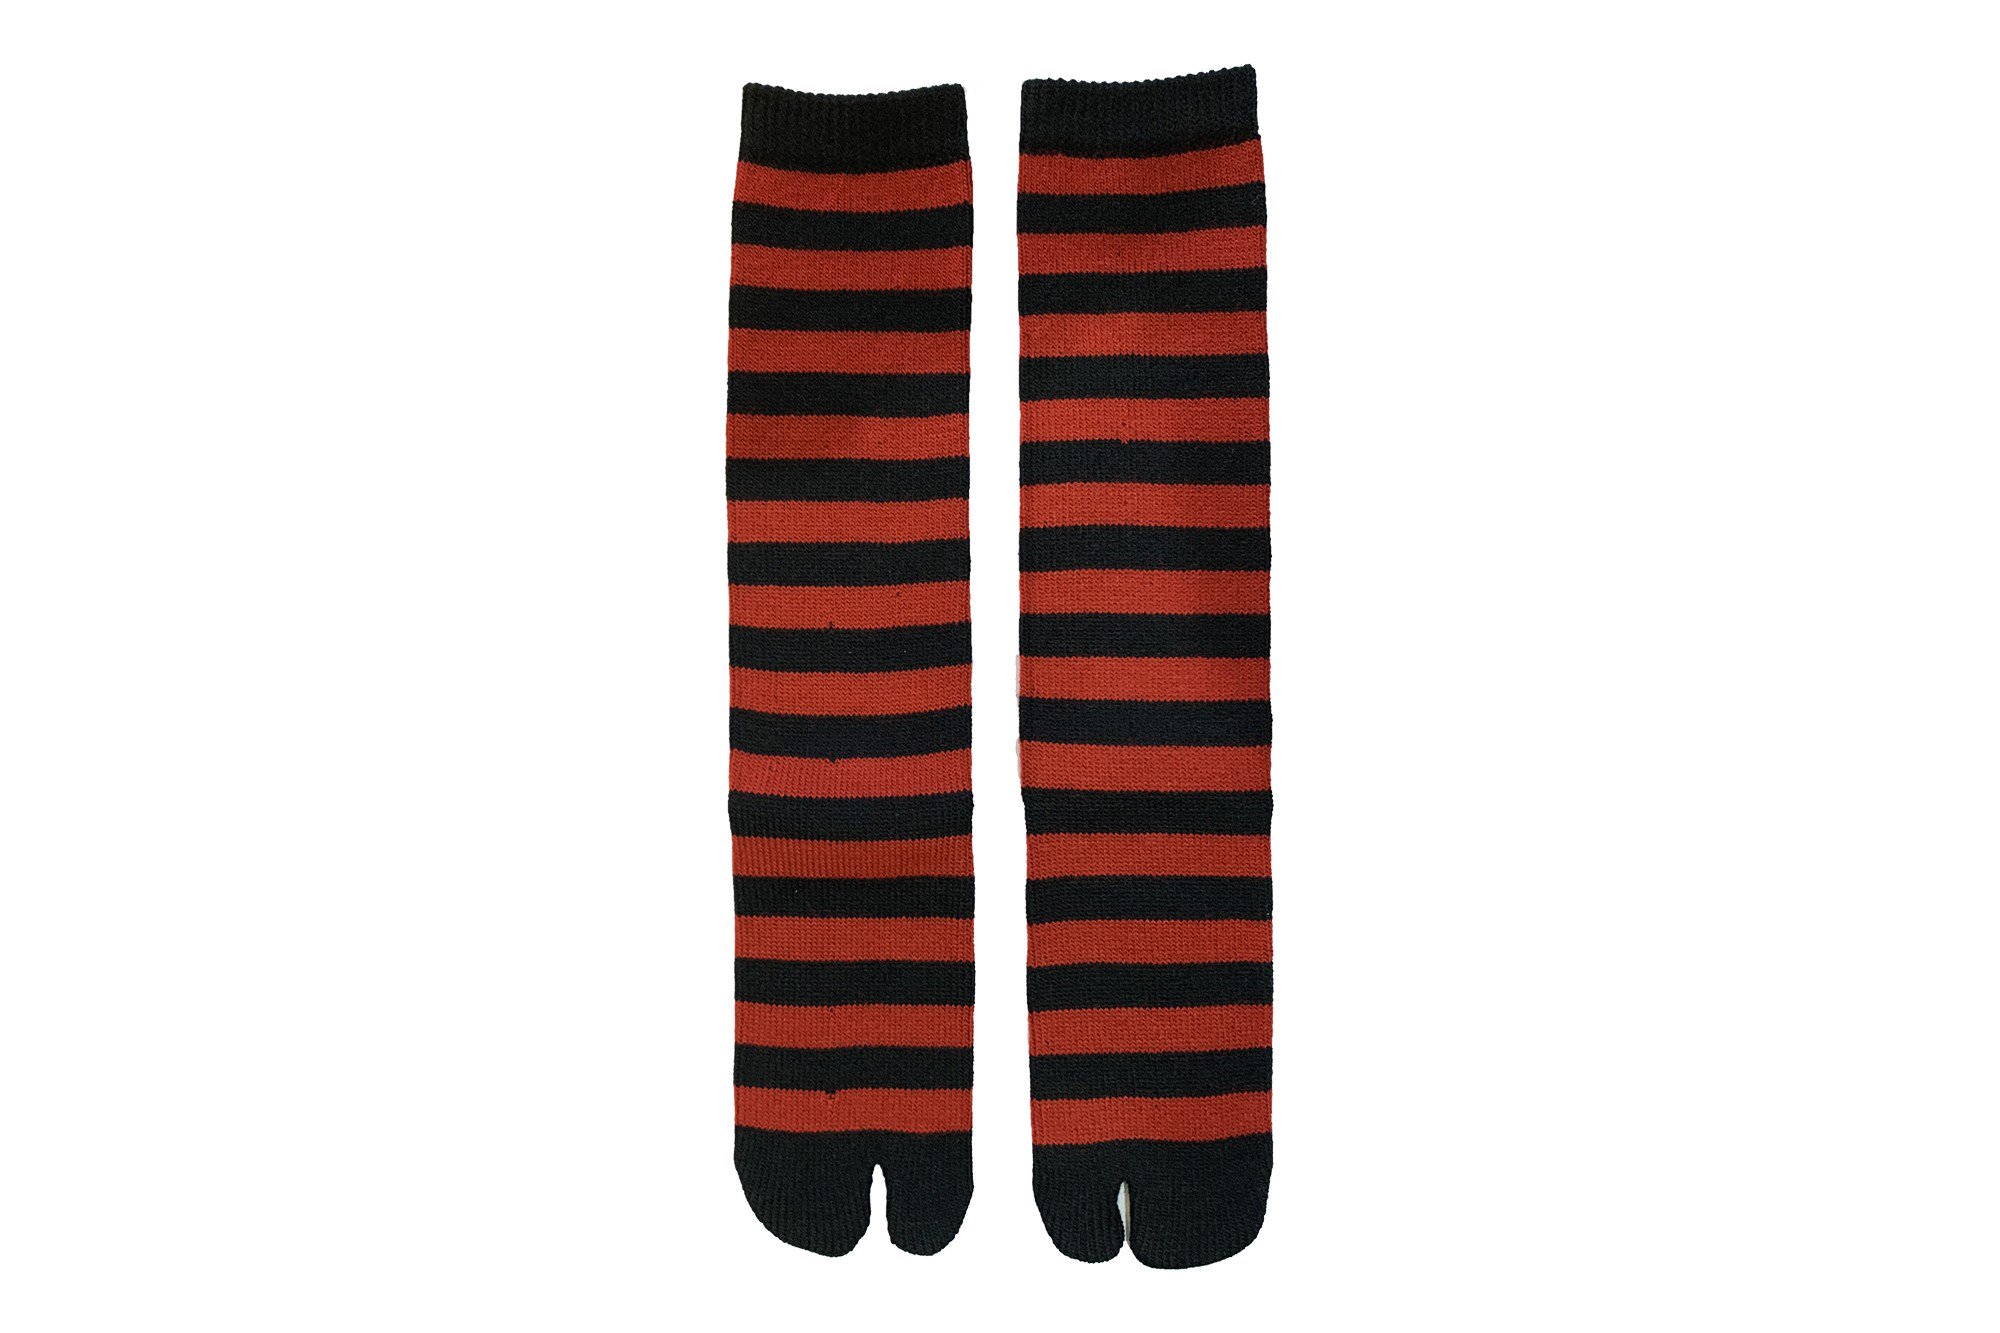 BORDER TABI SOCKS<br>RED<img class='new_mark_img2' src='https://img.shop-pro.jp/img/new/icons5.gif' style='border:none;display:inline;margin:0px;padding:0px;width:auto;' />